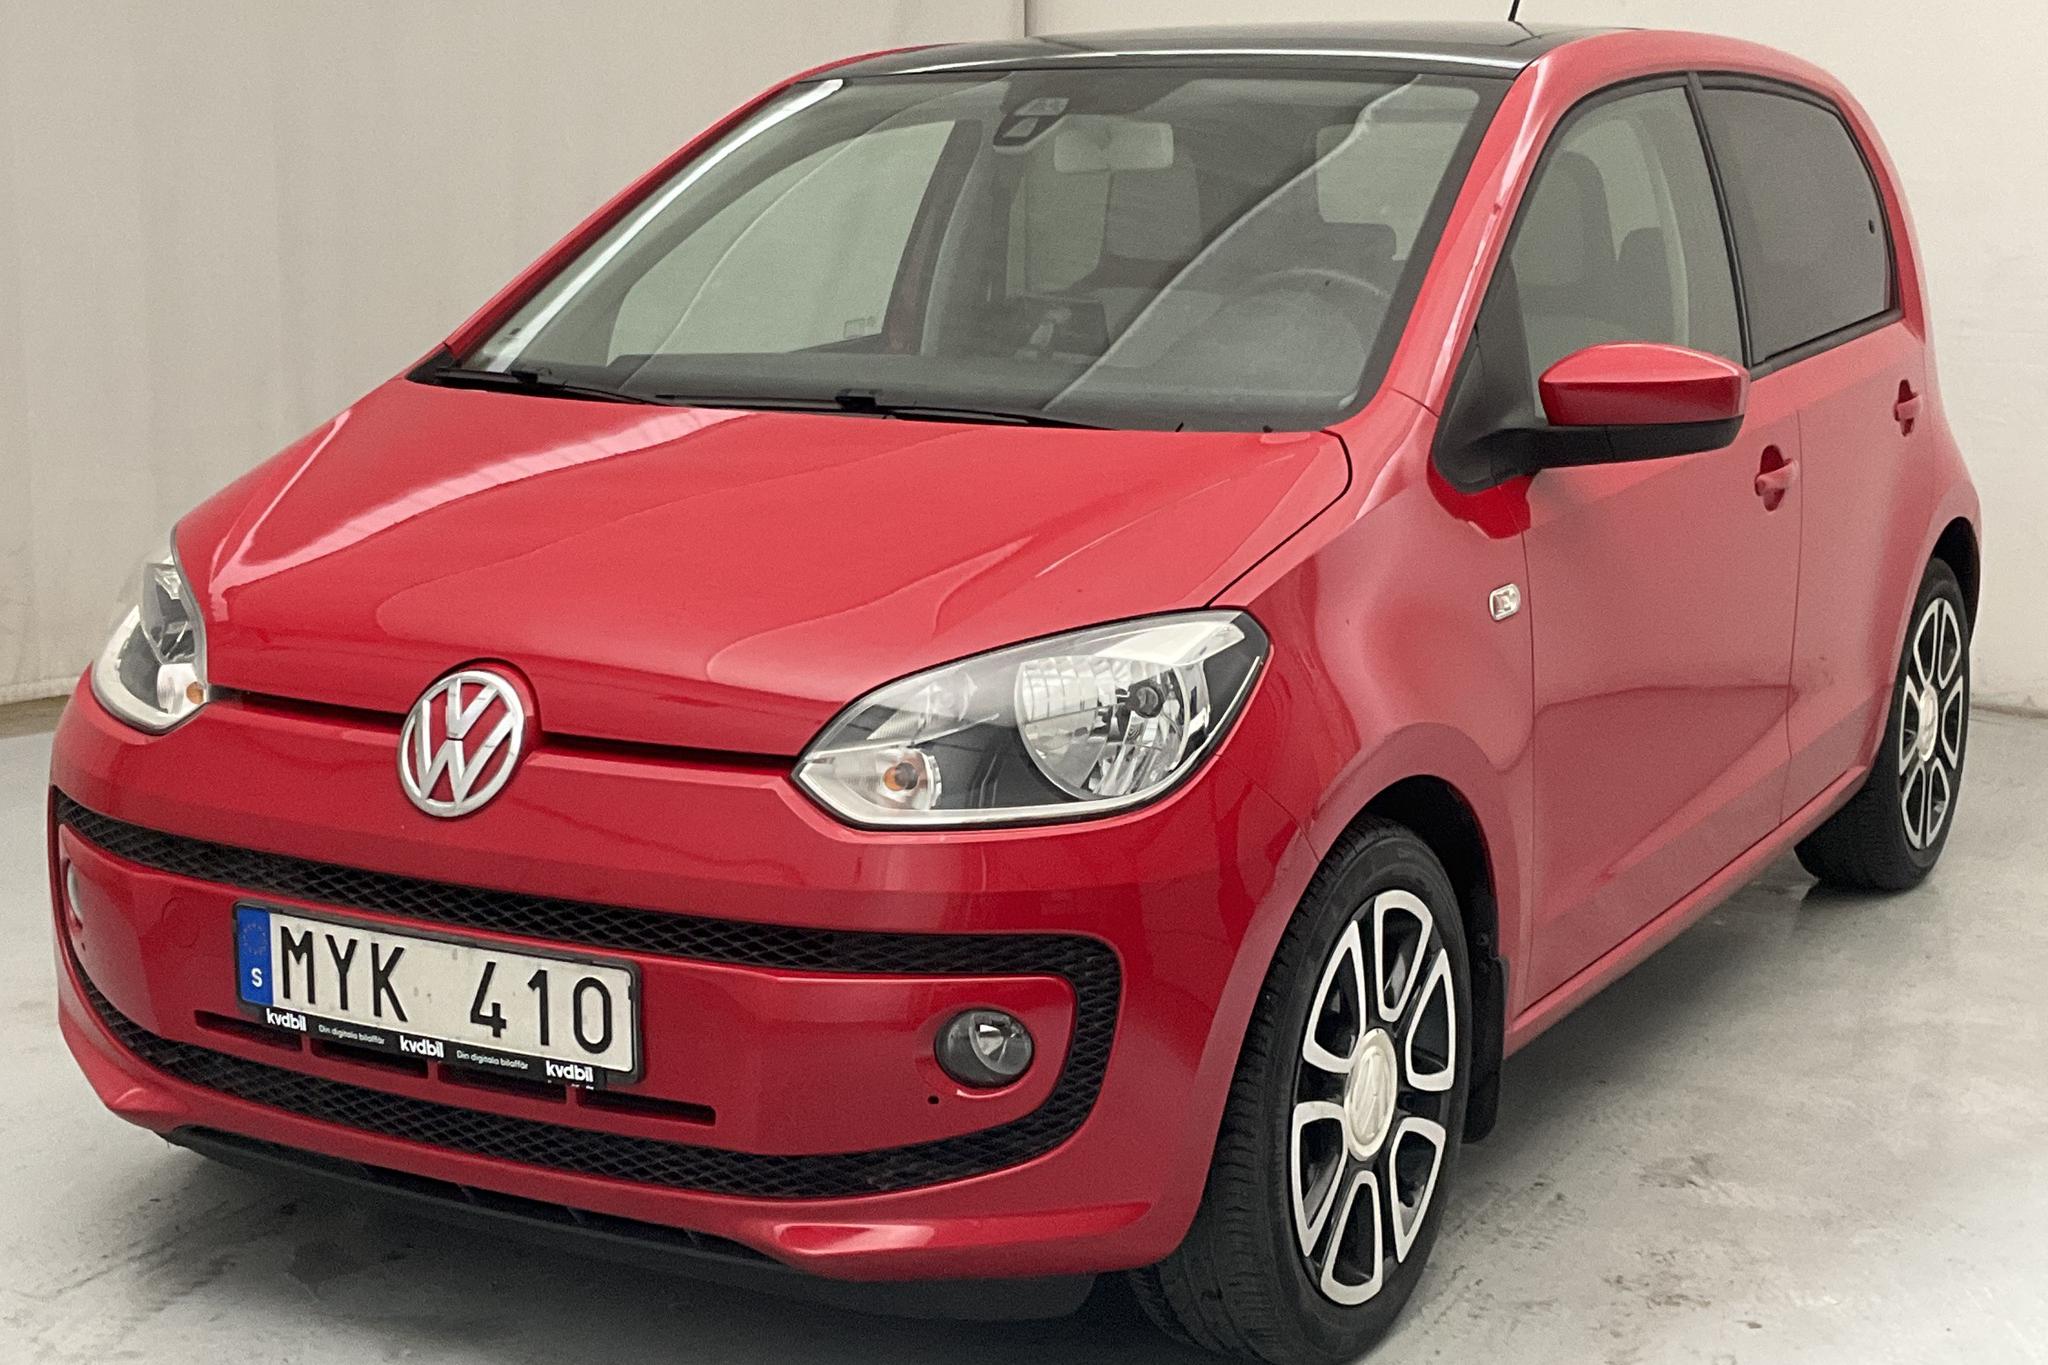 VW up! 1.0 5dr (75hk) - 54 390 km - Manual - red - 2013